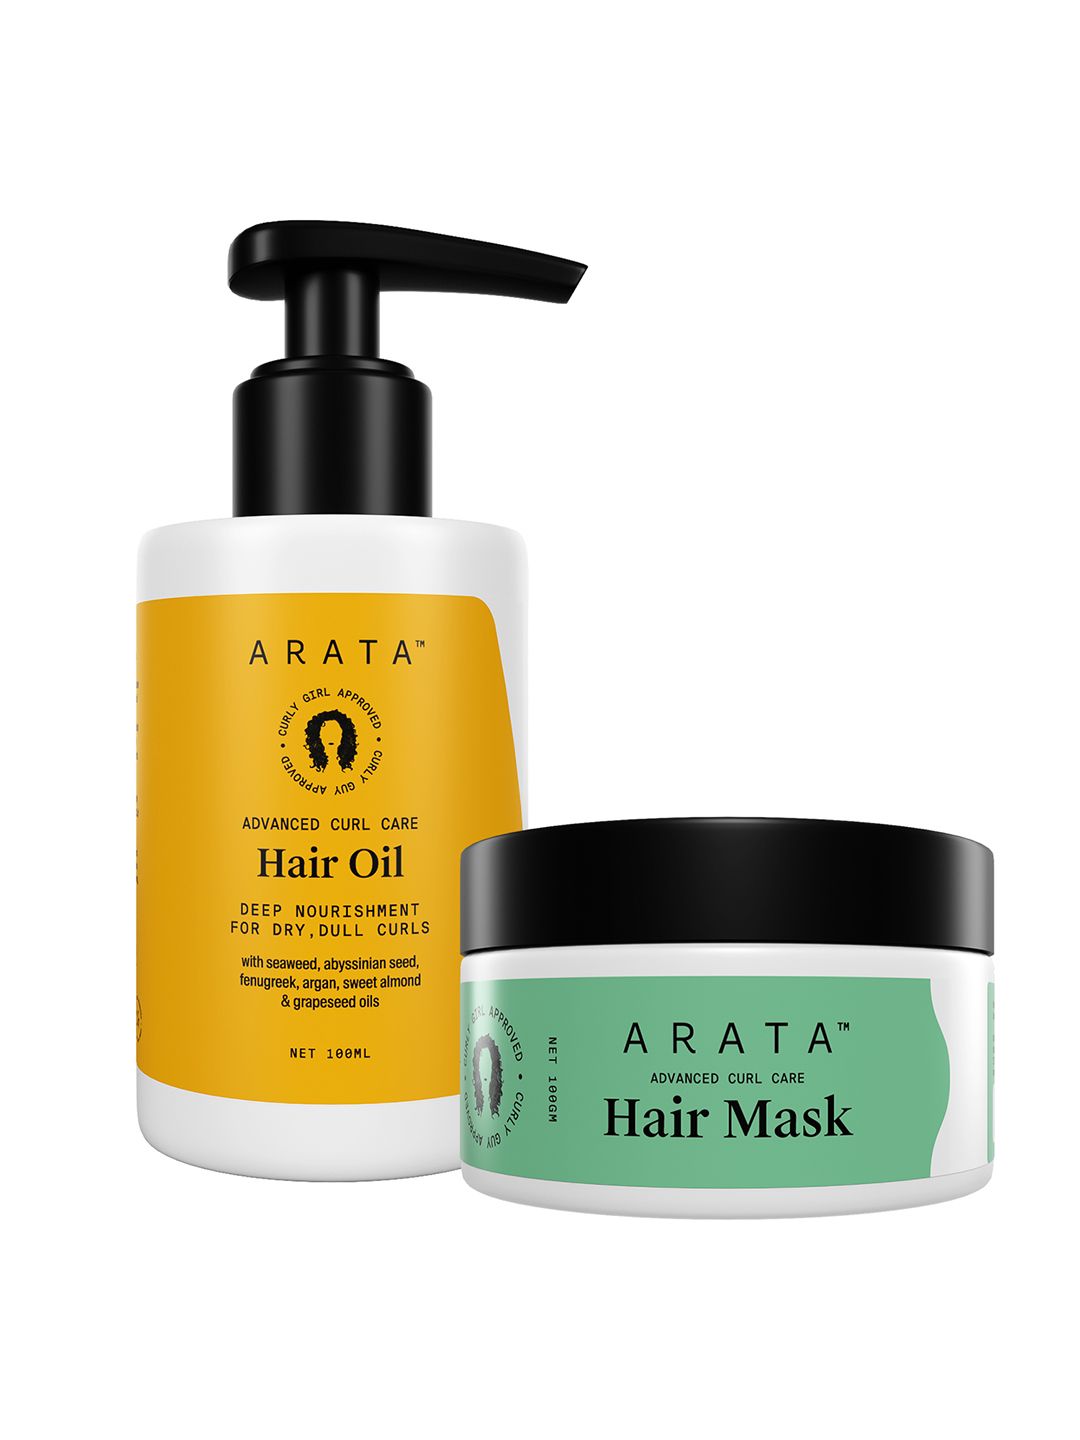 ARATA Set of Advanced Curl Care Vegan Quenching Nourishment Hair Oil & Hair Mask Price in India